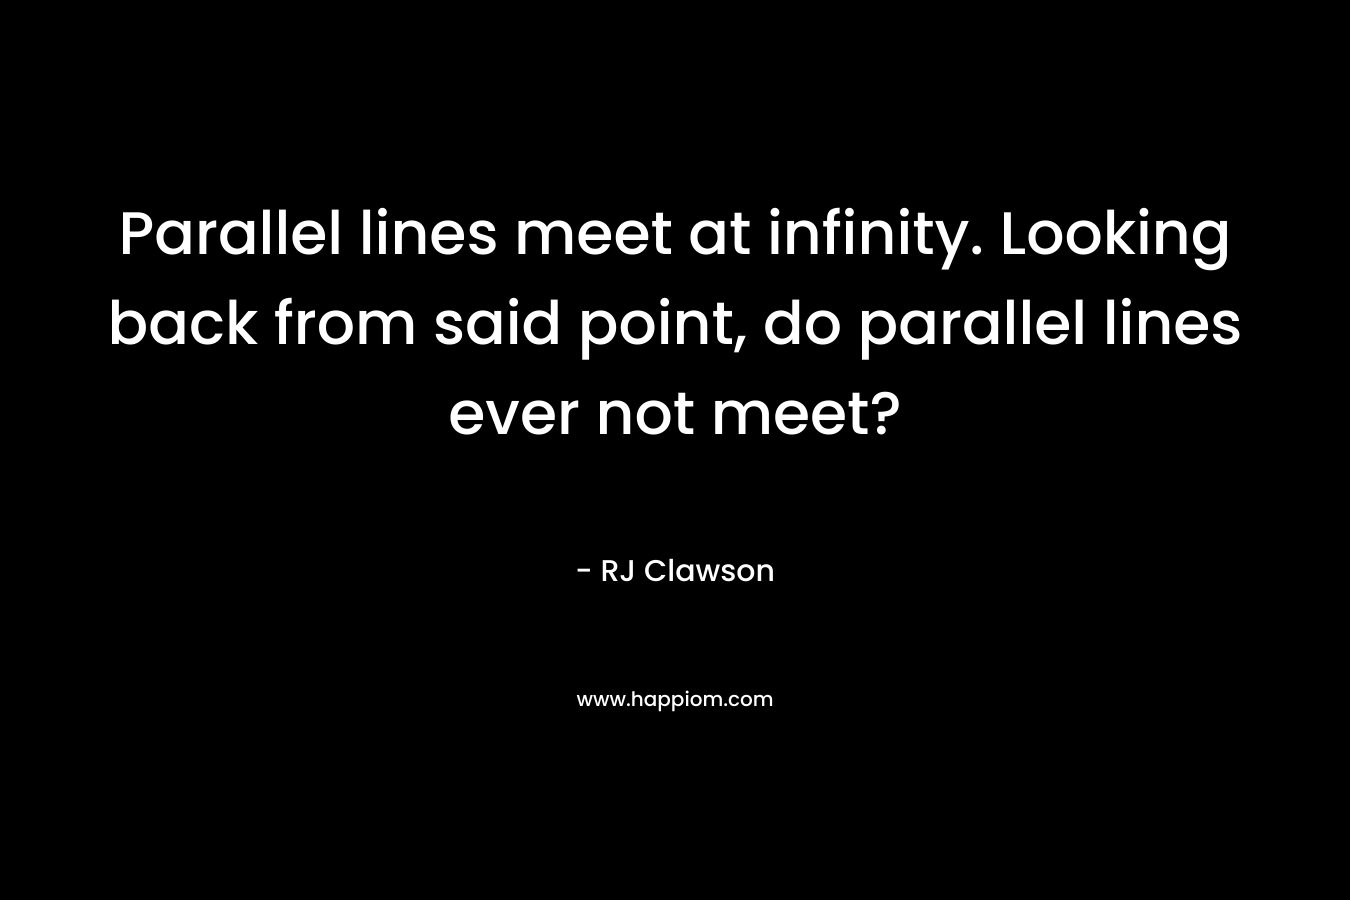 Parallel lines meet at infinity. Looking back from said point, do parallel lines ever not meet?